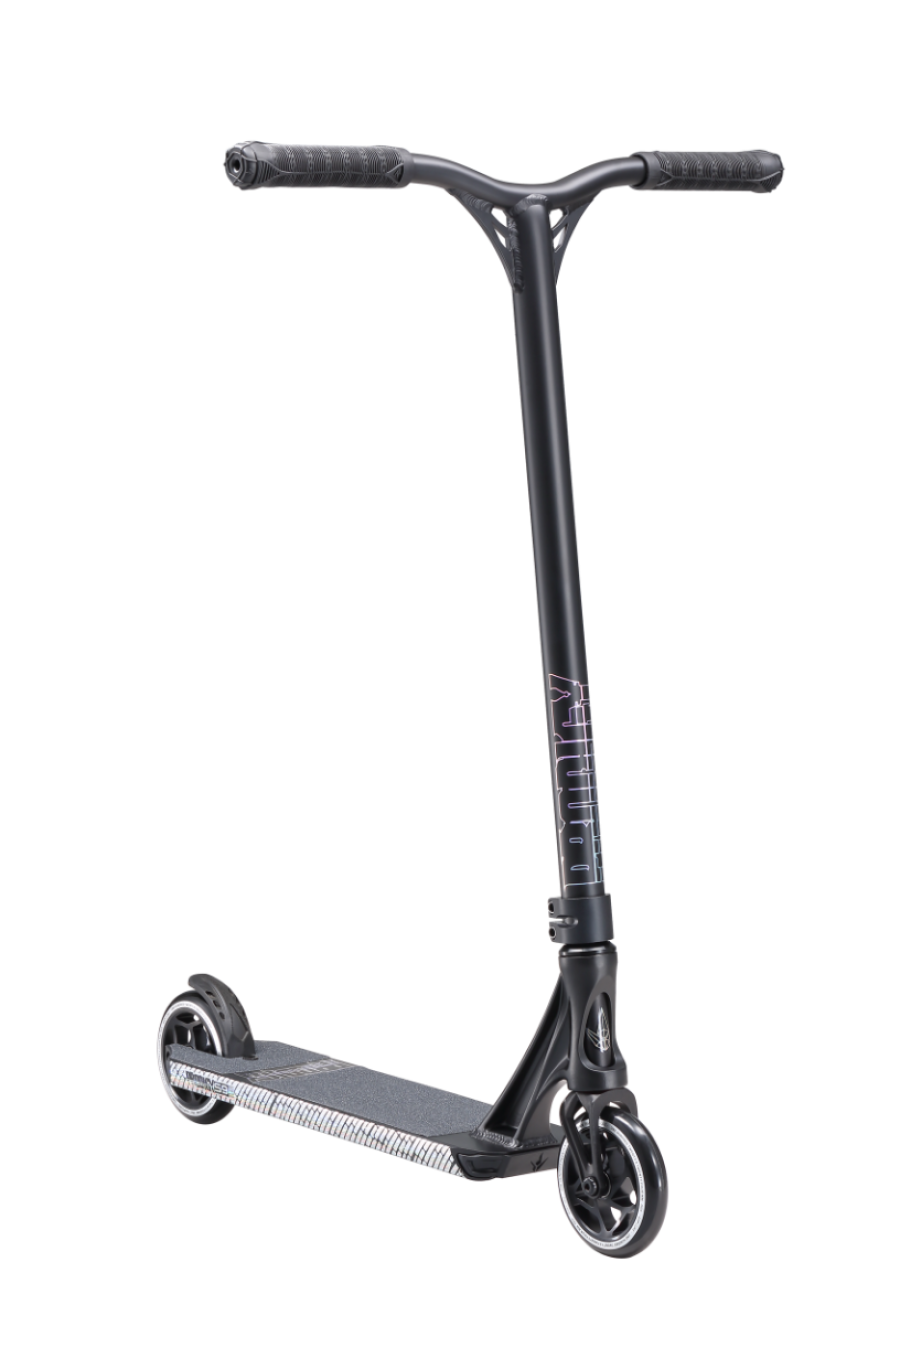 Envy Prodigy S9 Complete Scooter